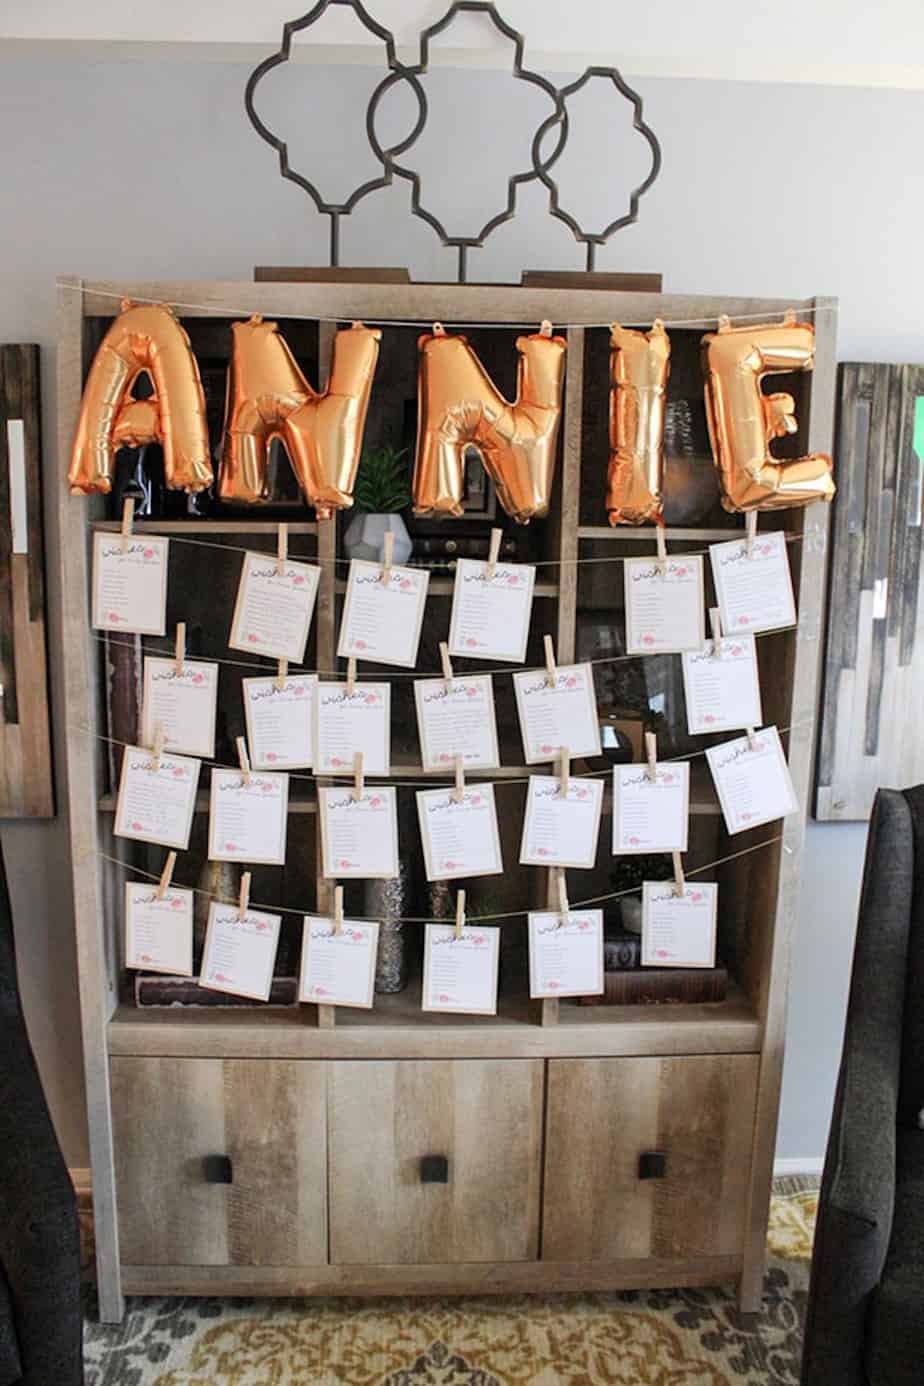 Wish cards hanging on display with balloons spelling out baby's name